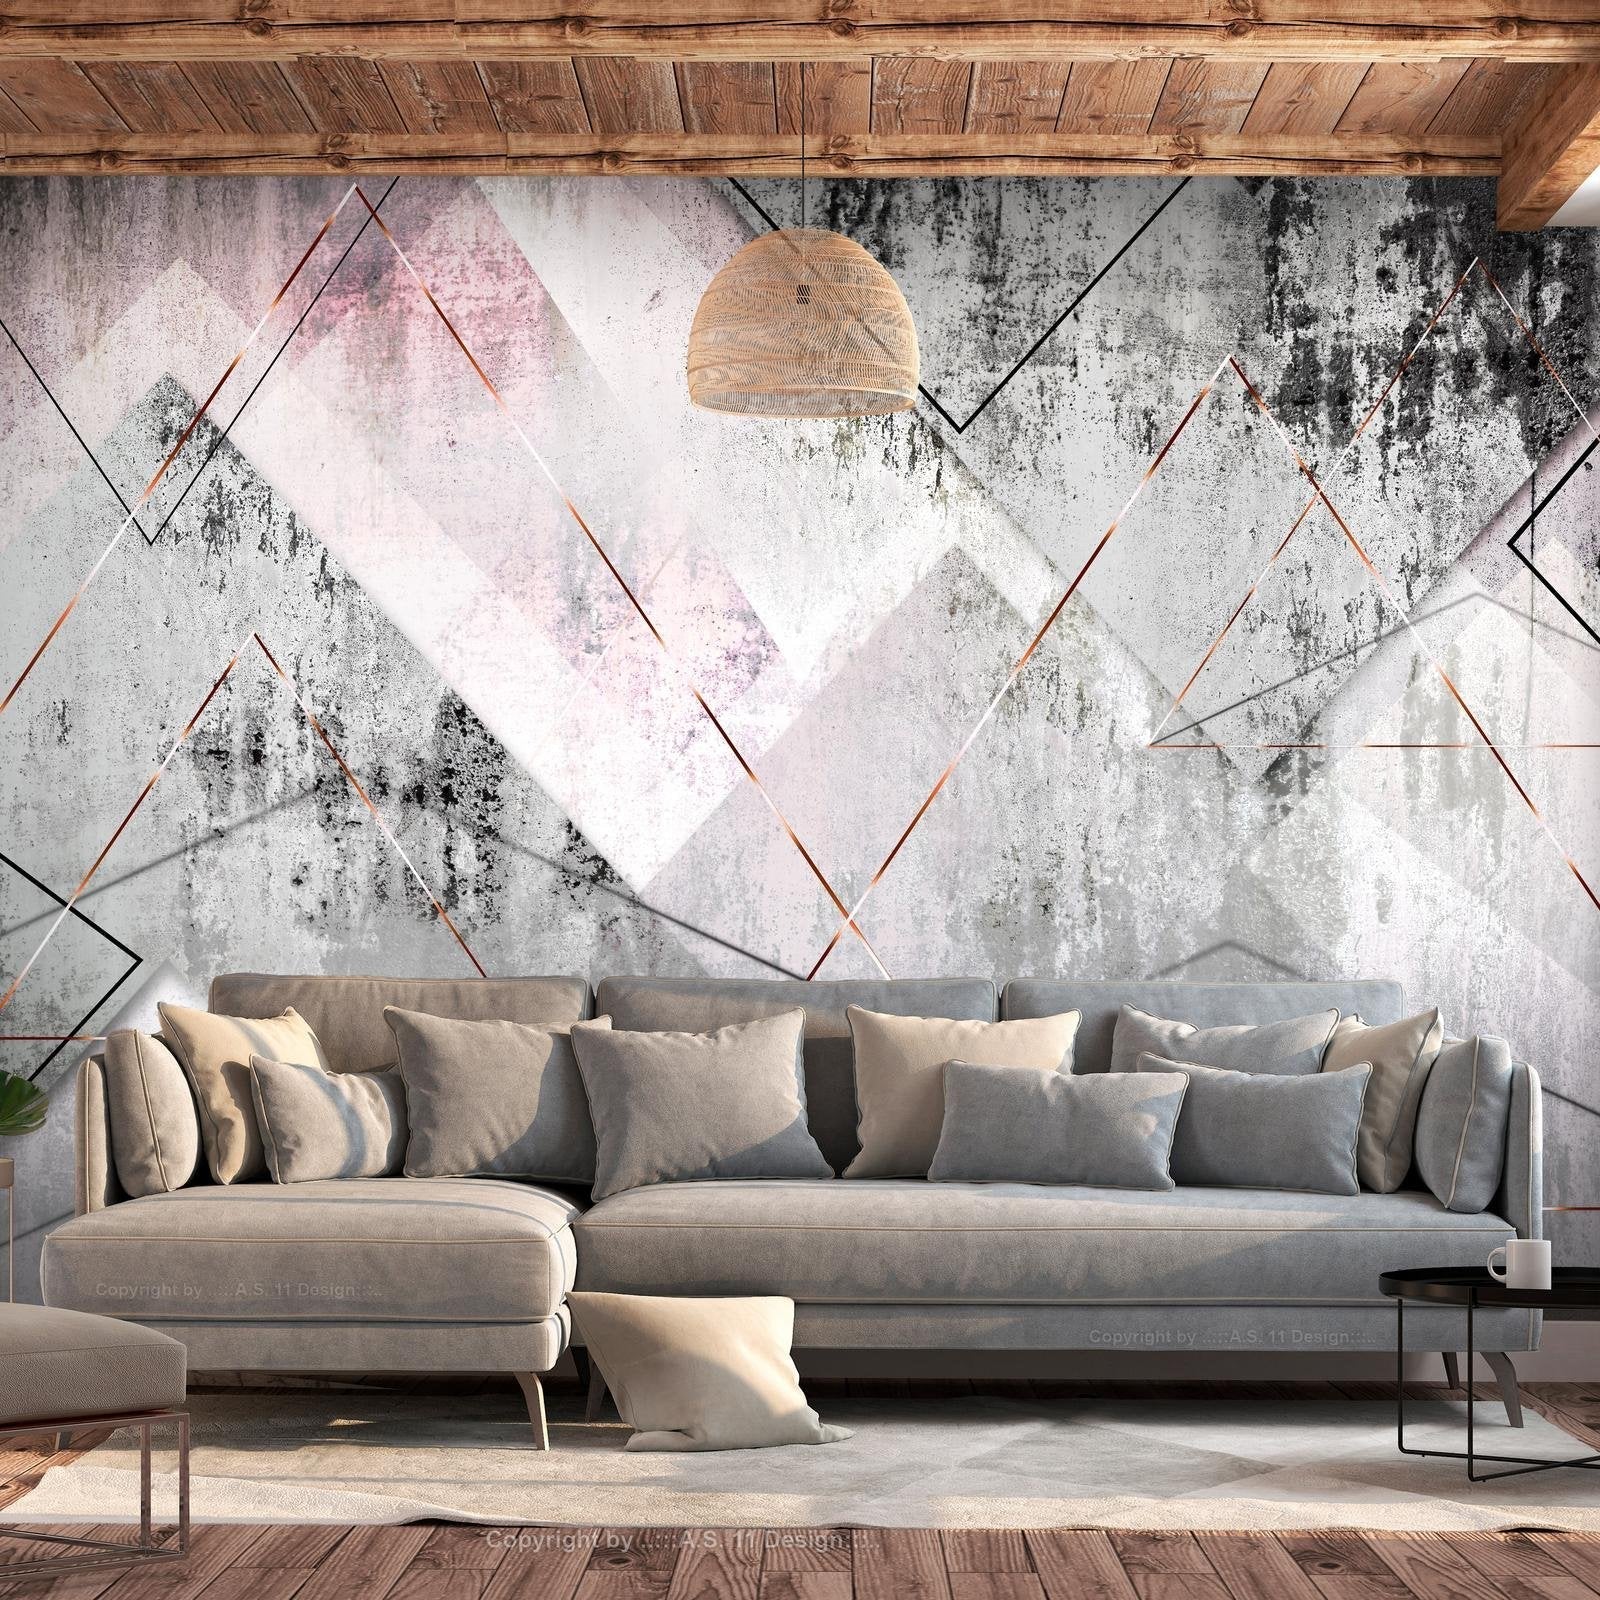 Peel and stick wall mural - Triangular Perspective-TipTopHomeDecor